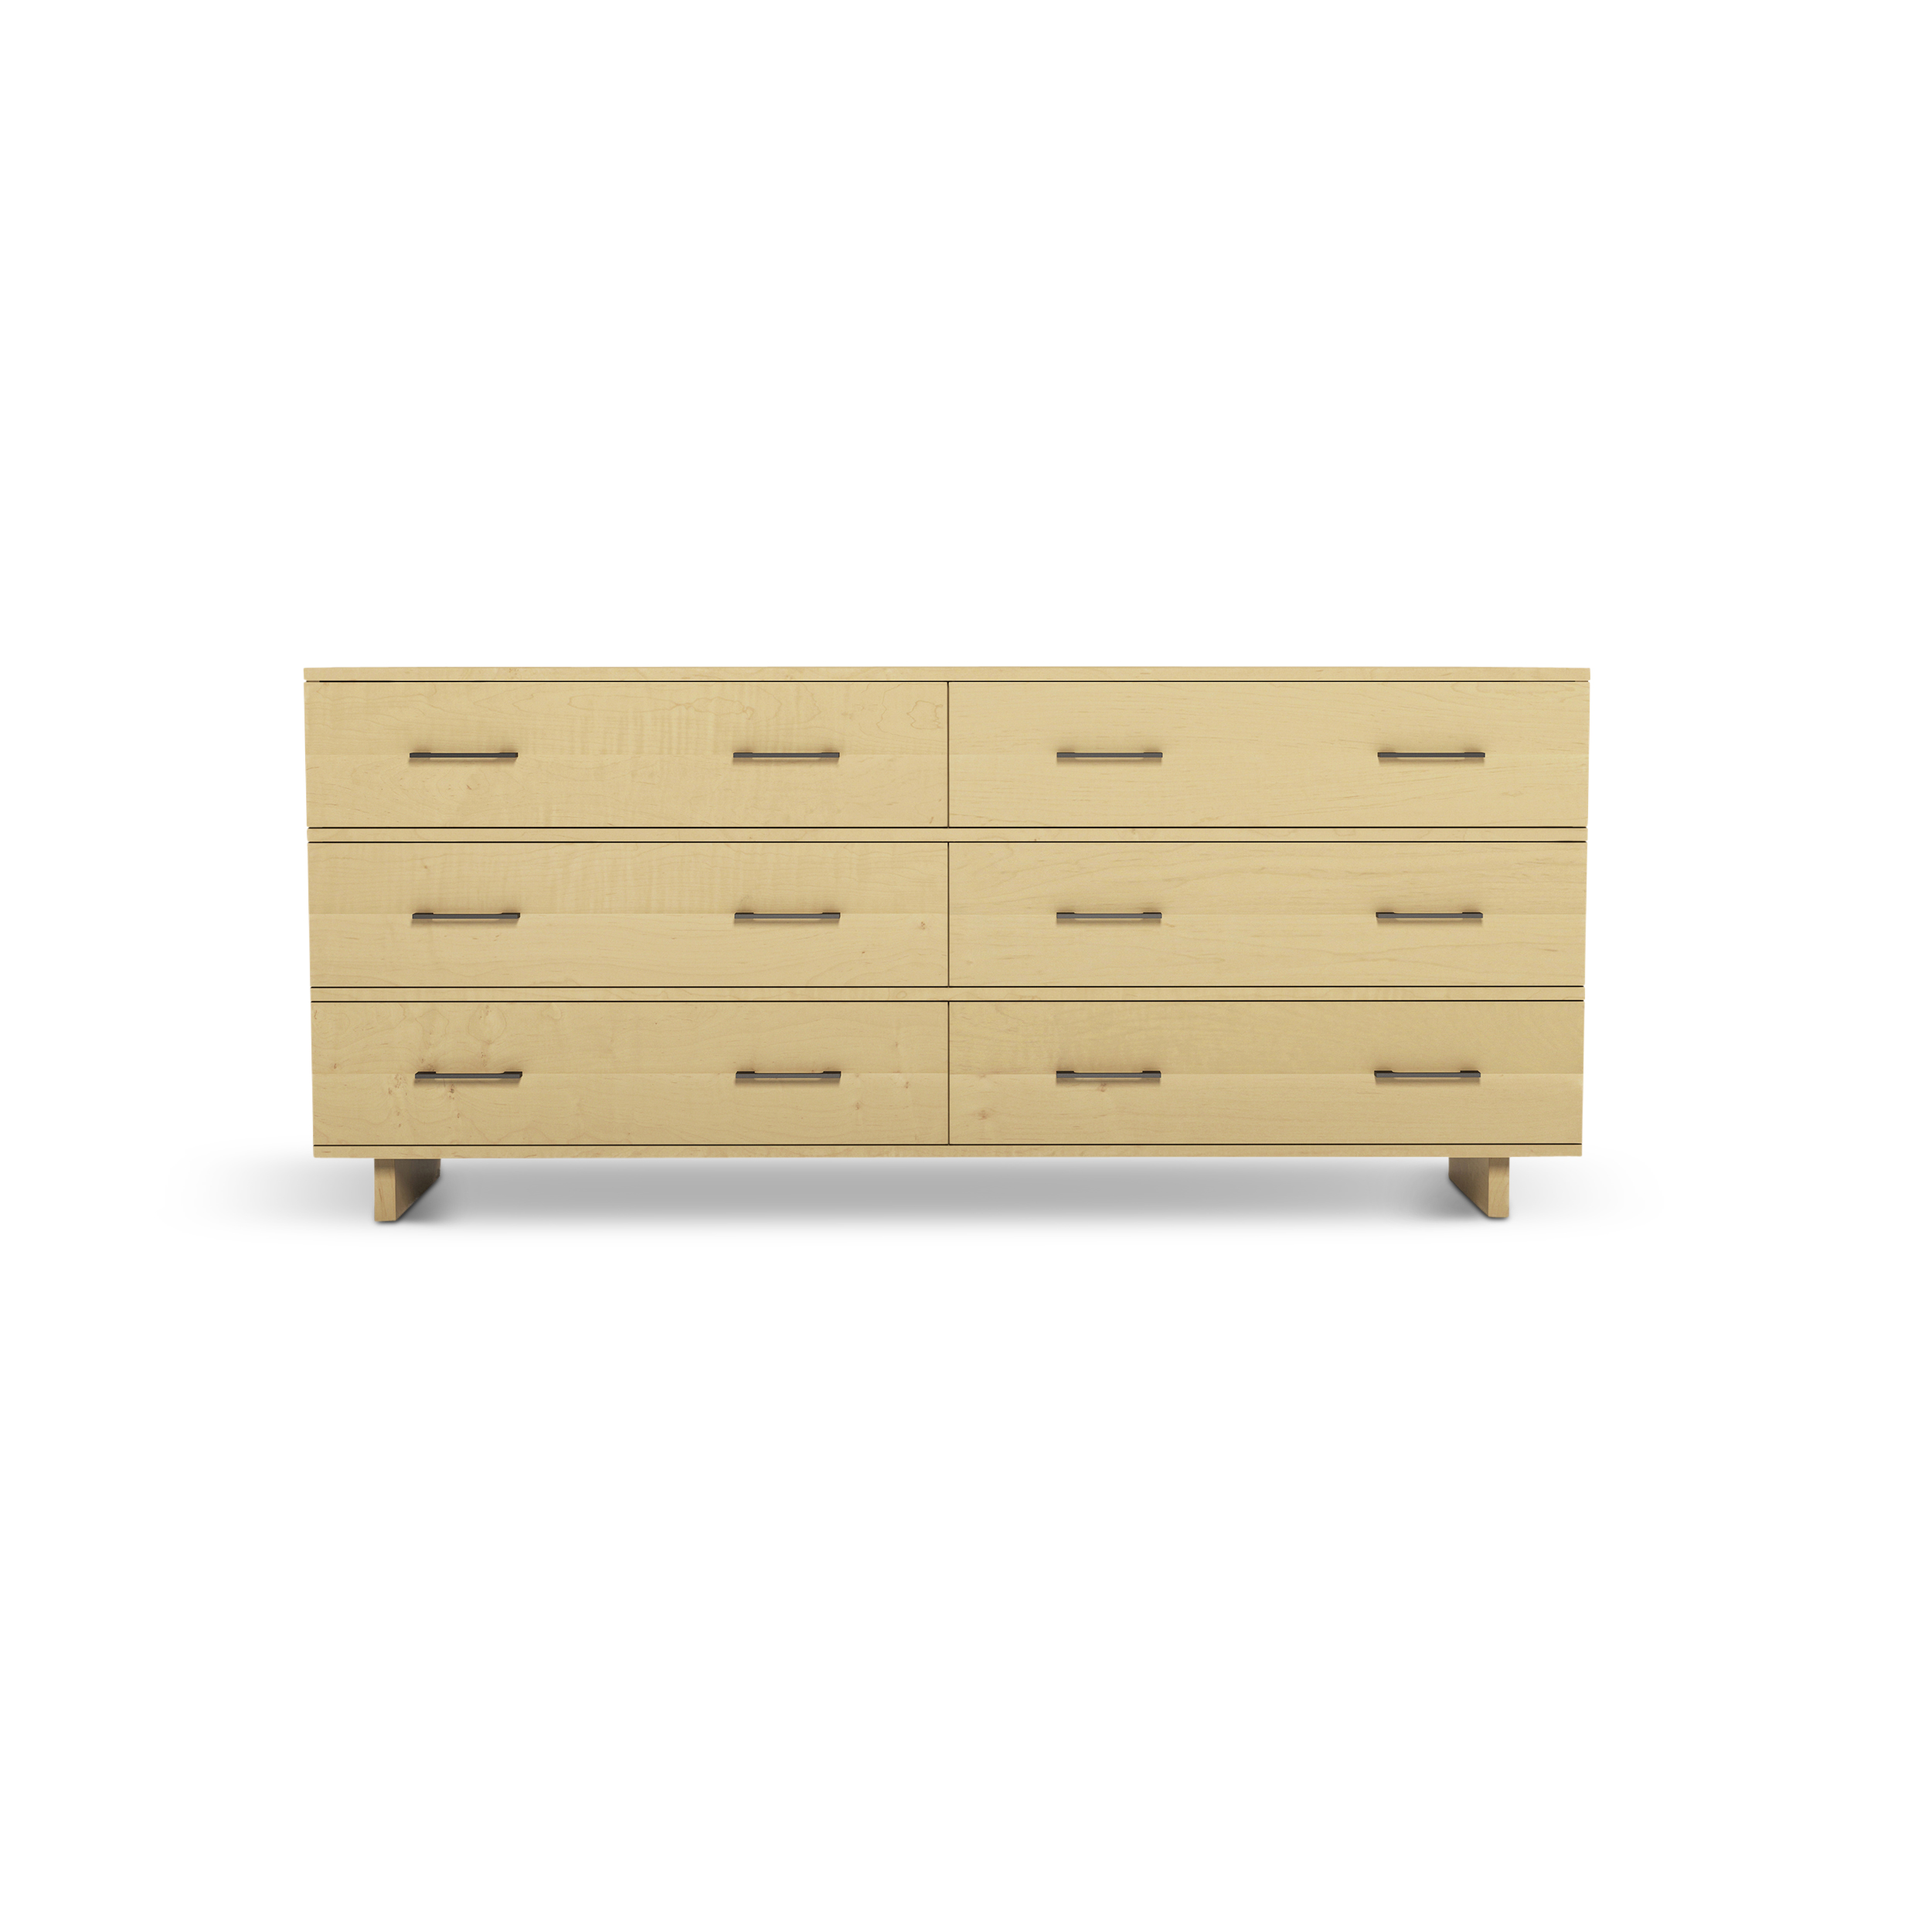 Series 252 Dresser With Six Drawers At 72″ In Width